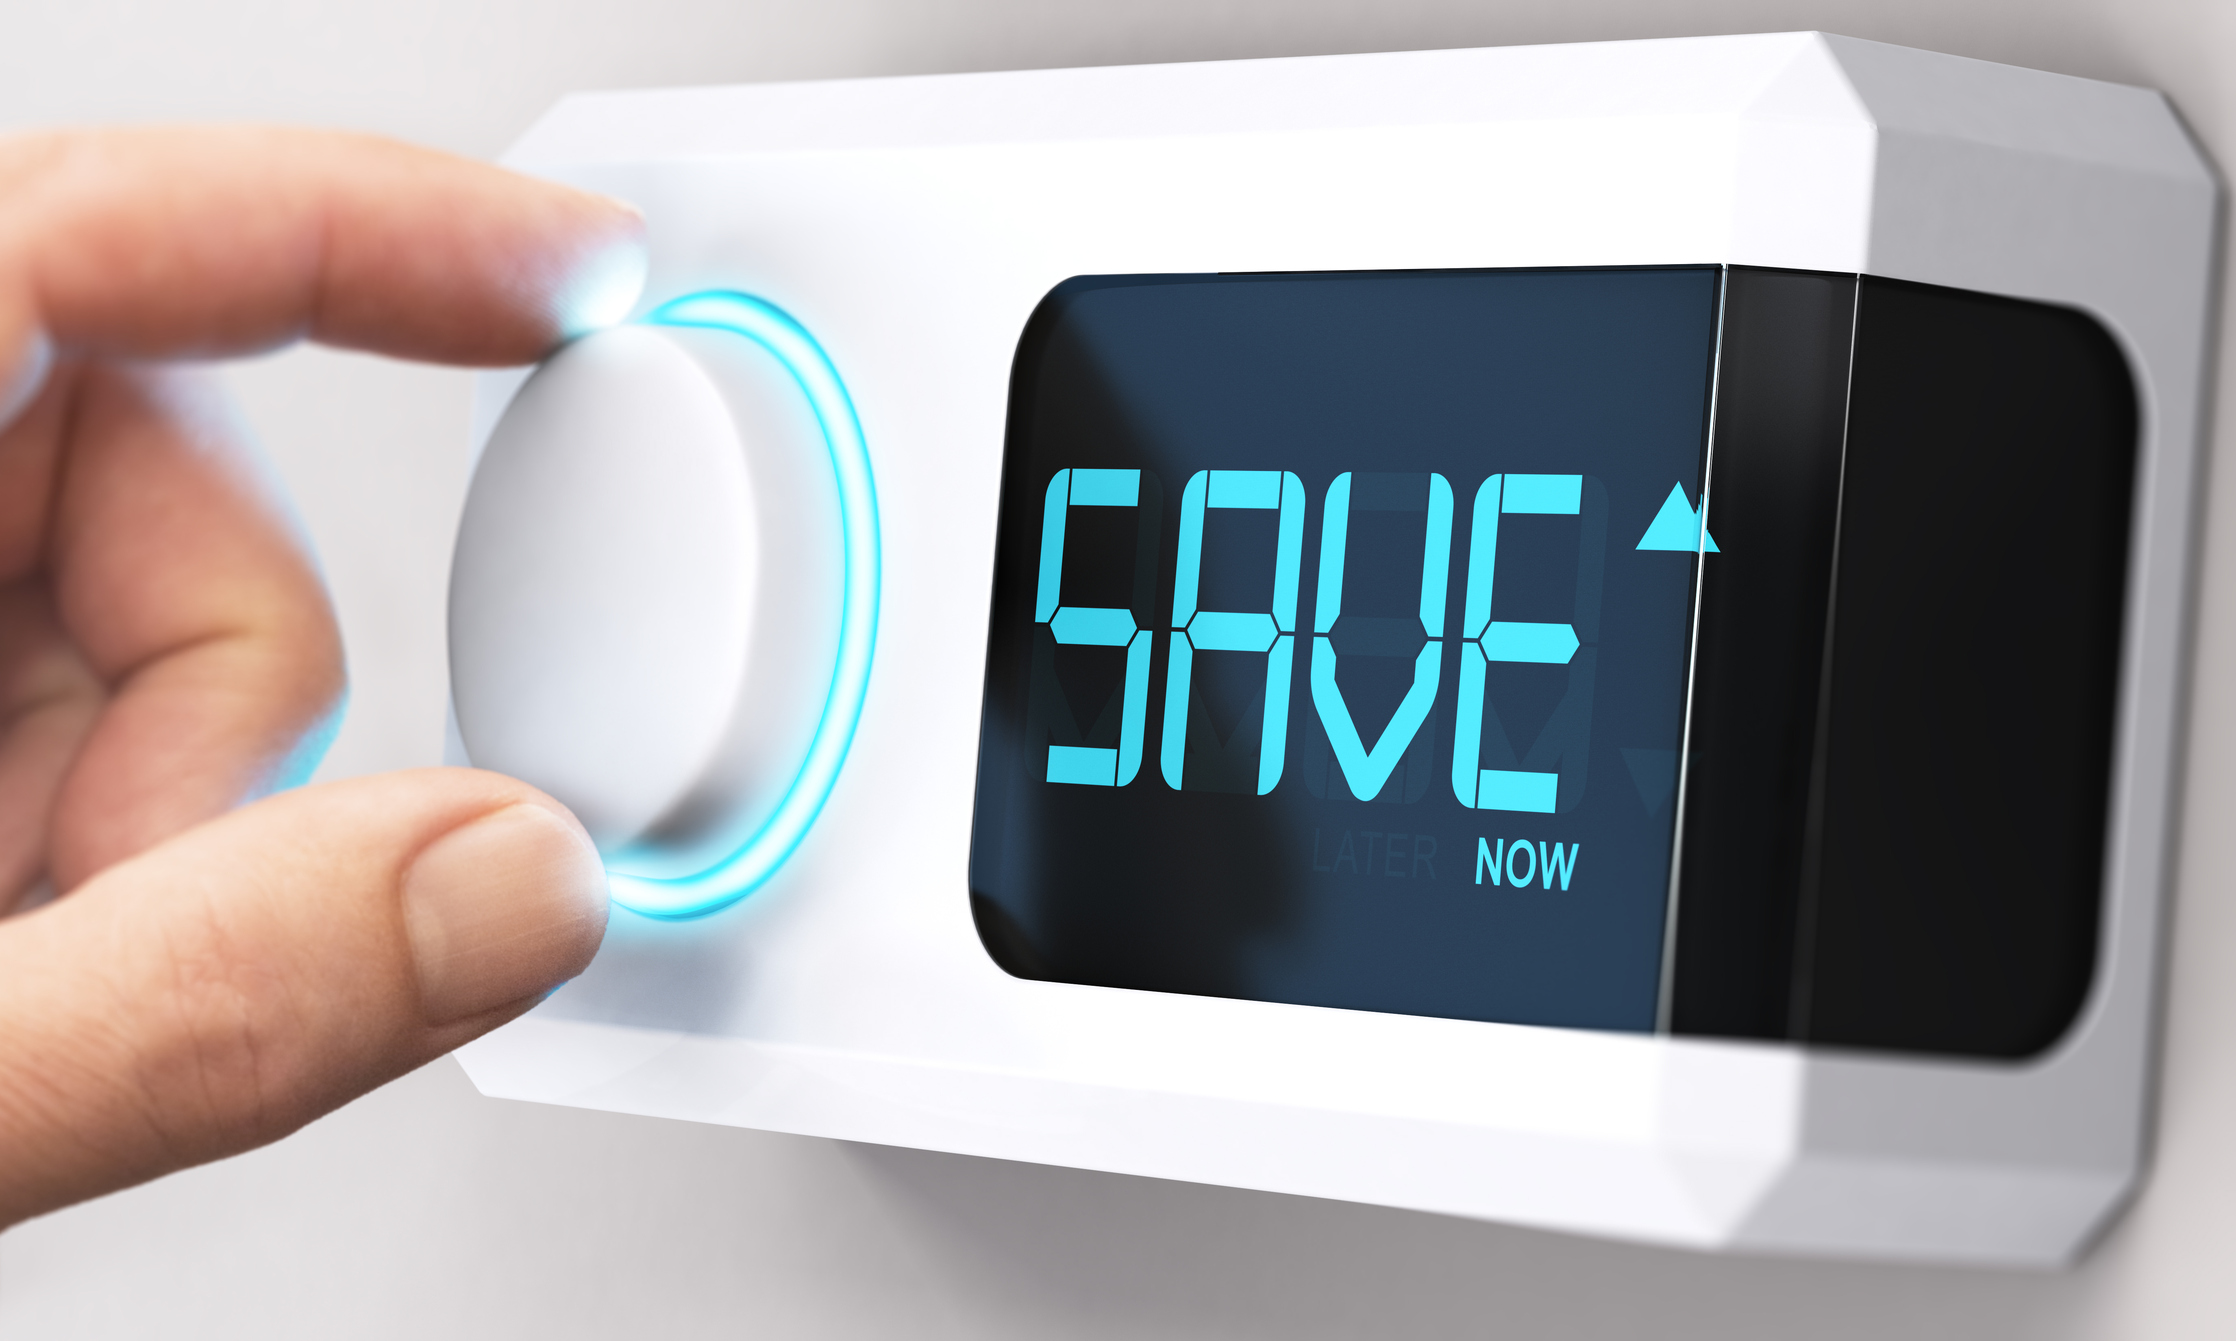 Close-up of a hand adjusting a knob on a white smart thermostat, with digital screen reading "SAVE now"